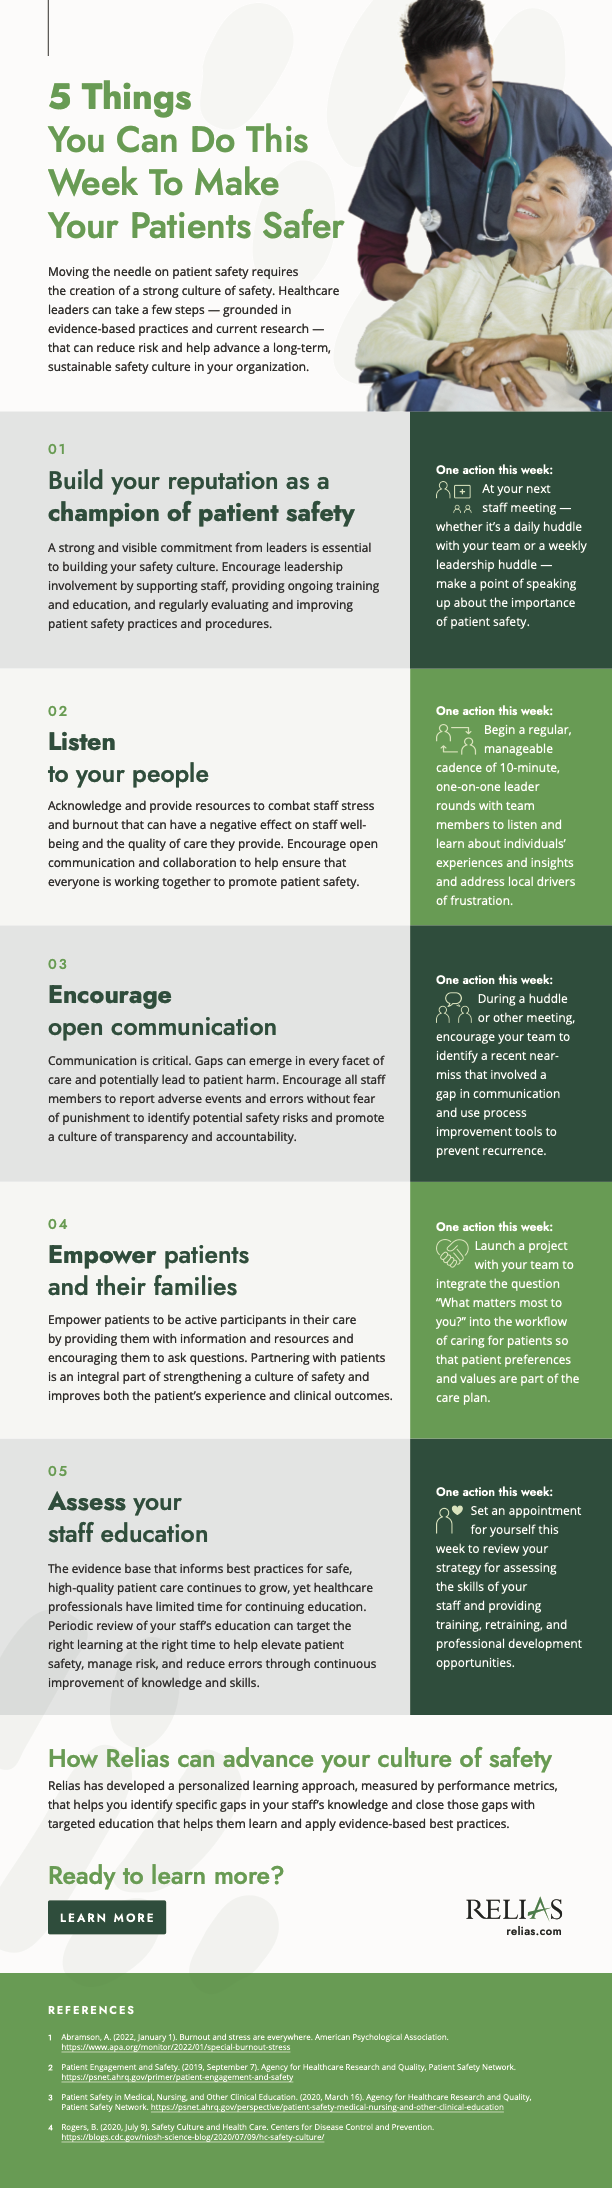 Patient Safety infographic